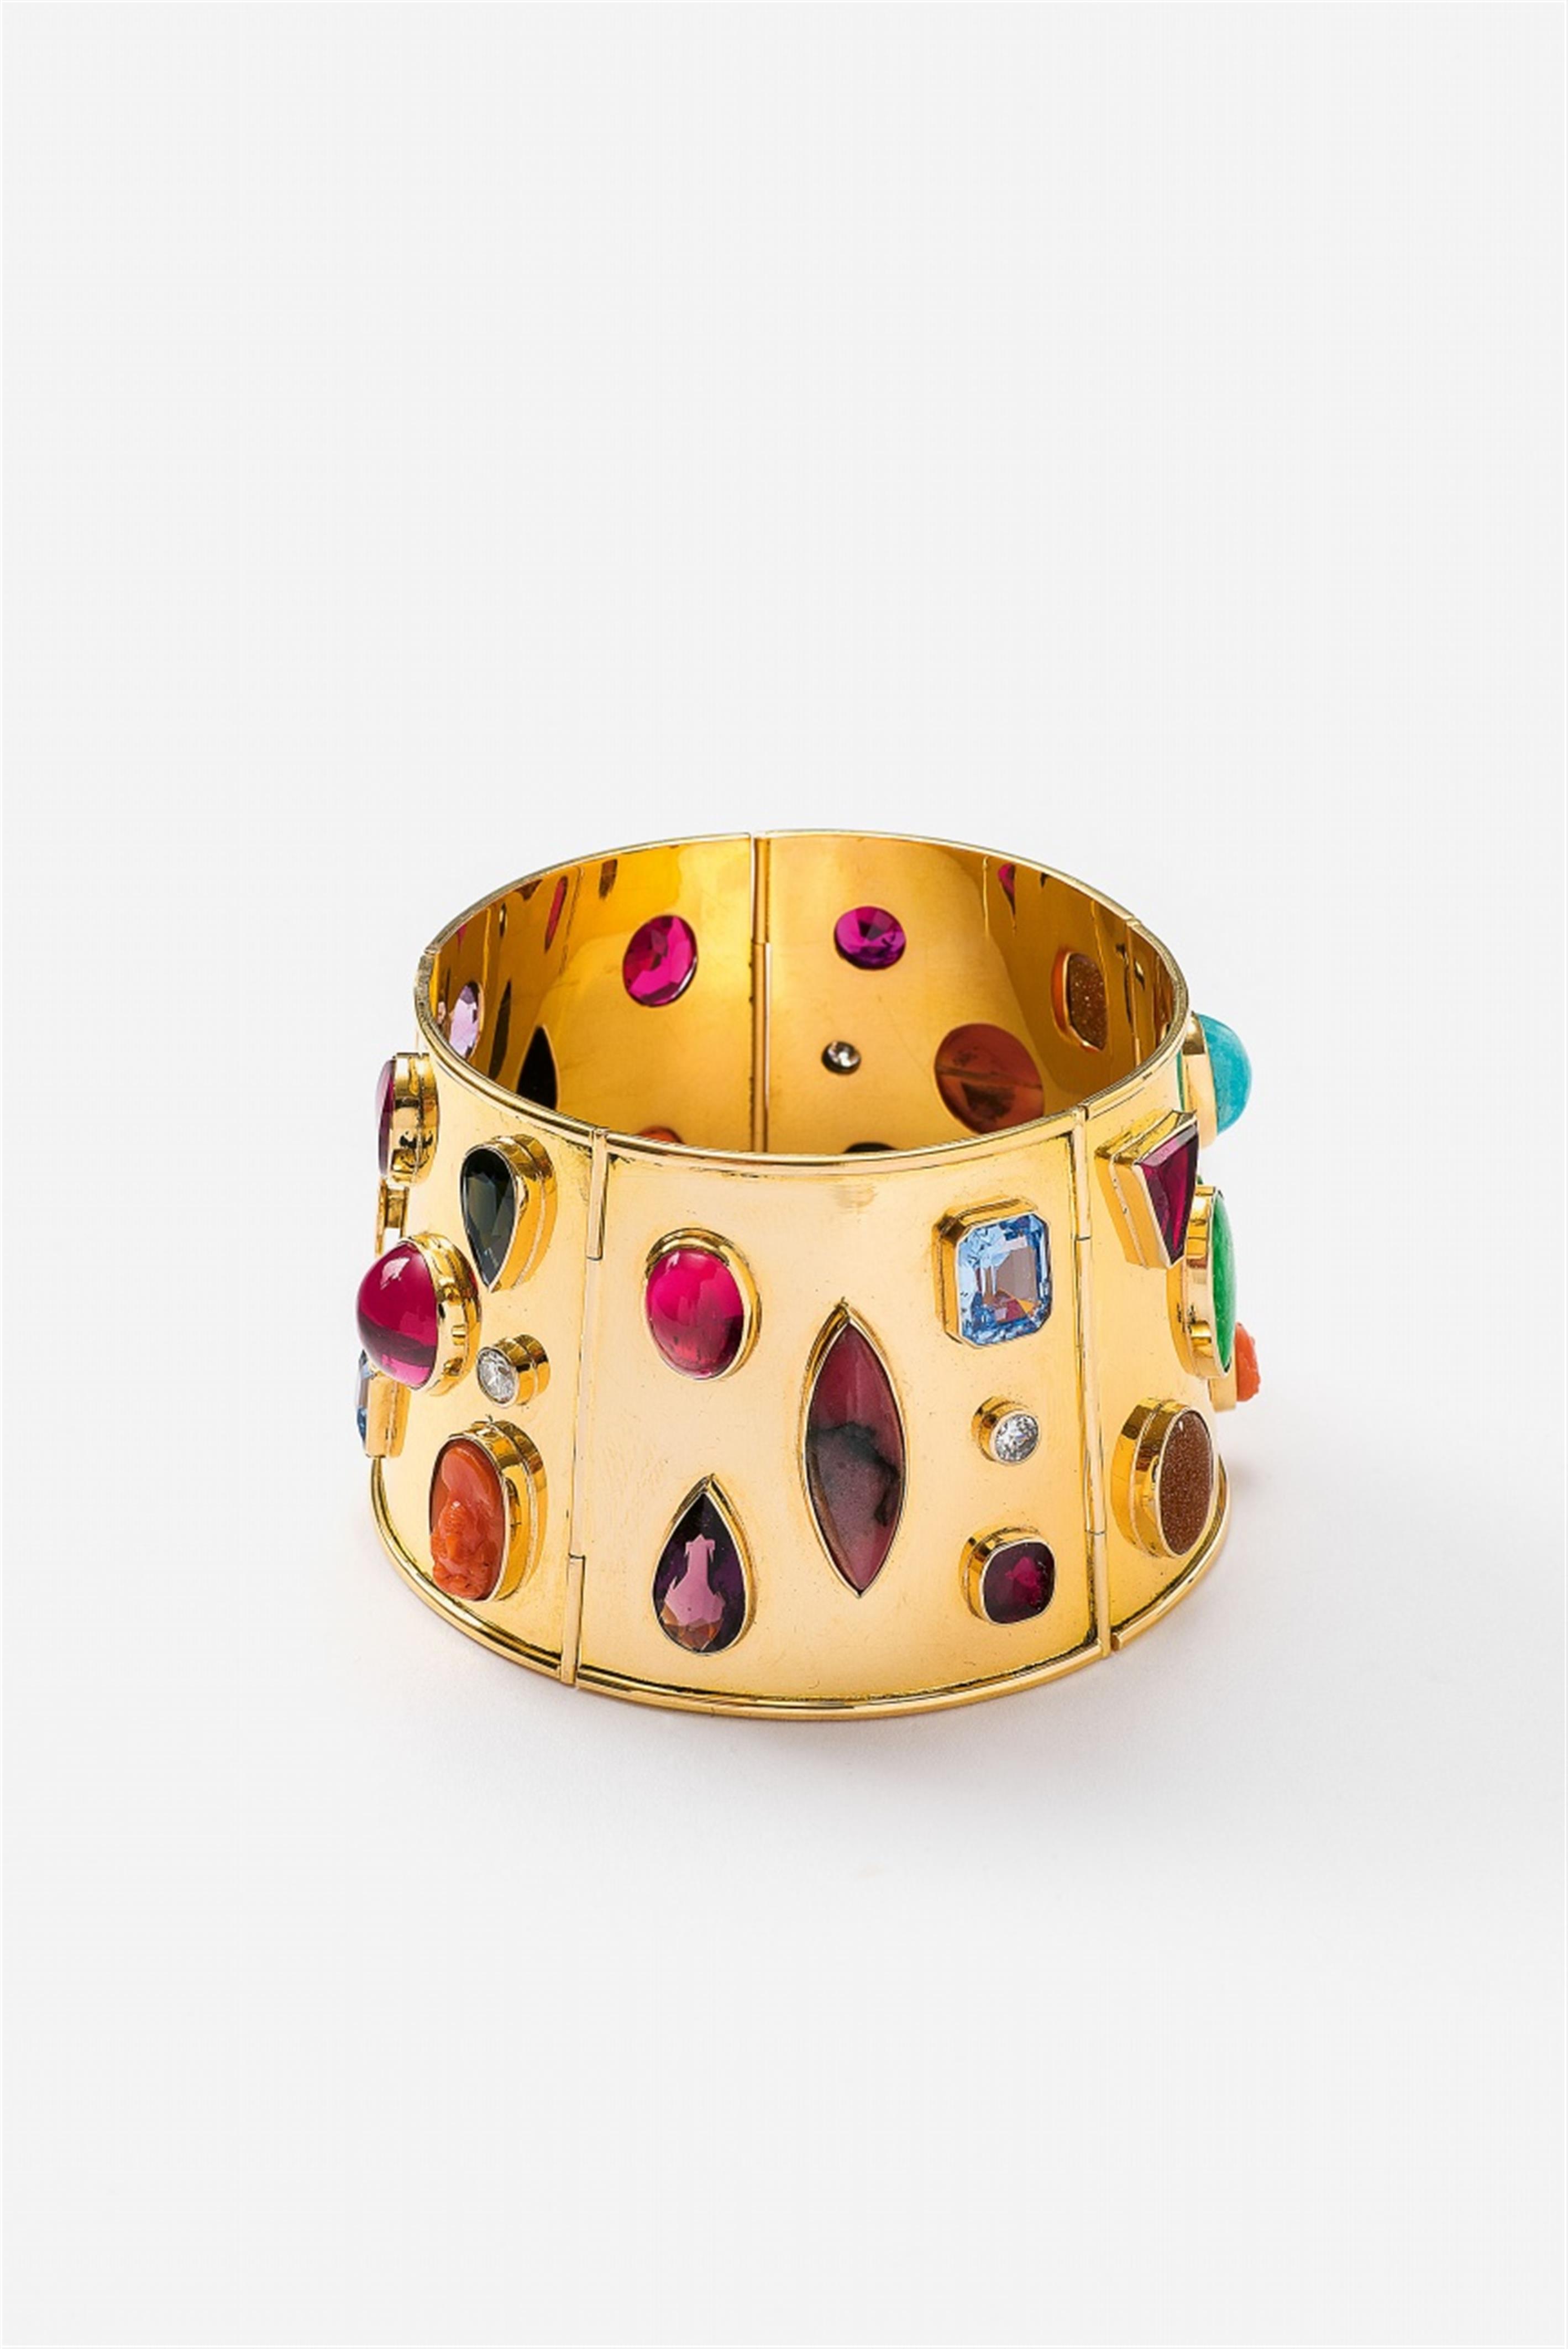 An 18k rose gold and coloured stone bracelet - image-3